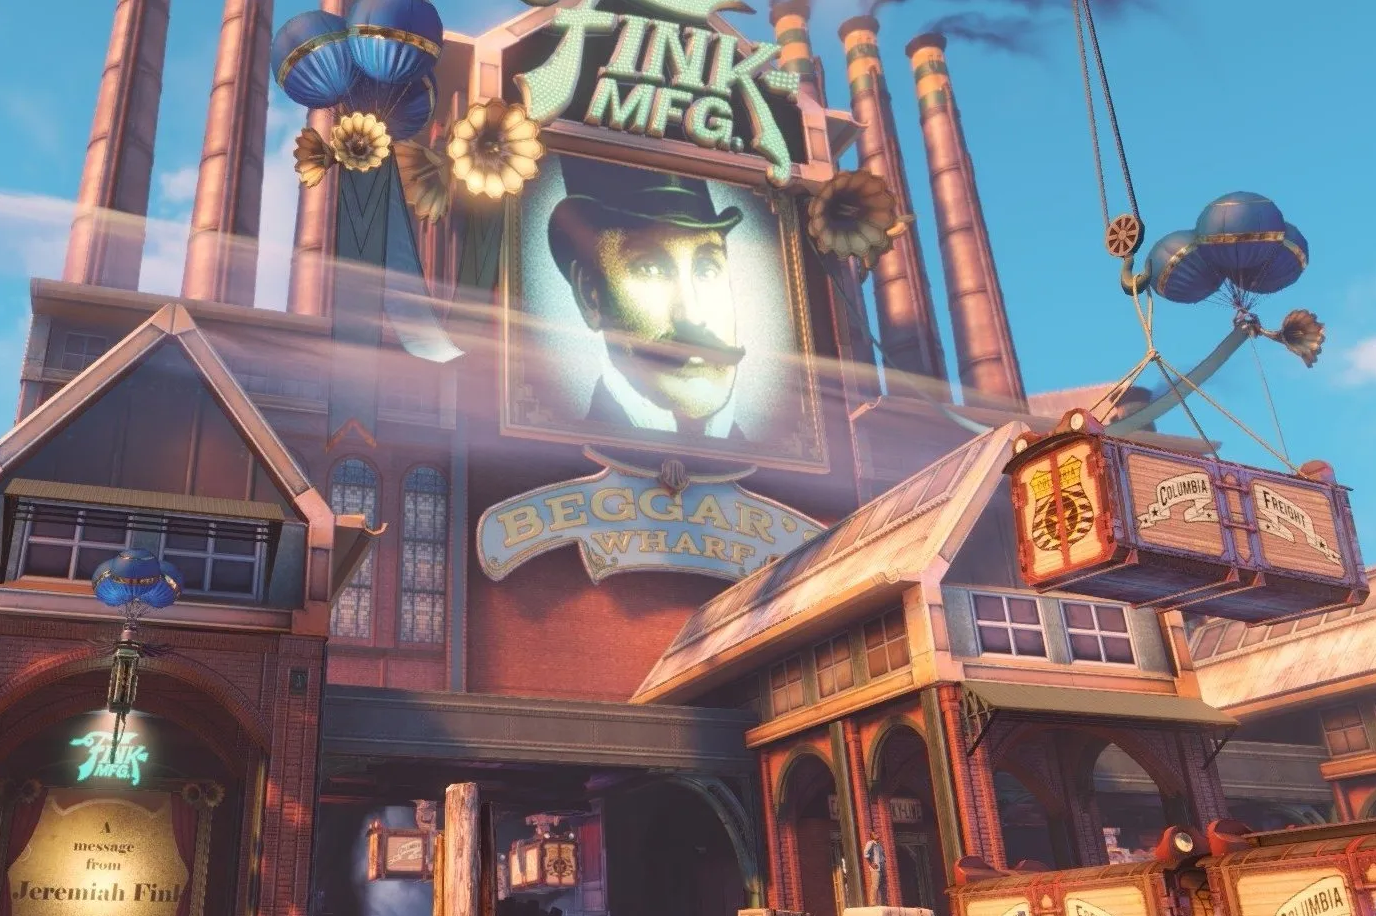 A stylized, cartoonishly bright factory against a deep blue sky with the "Fink Mfg" legend over the door.